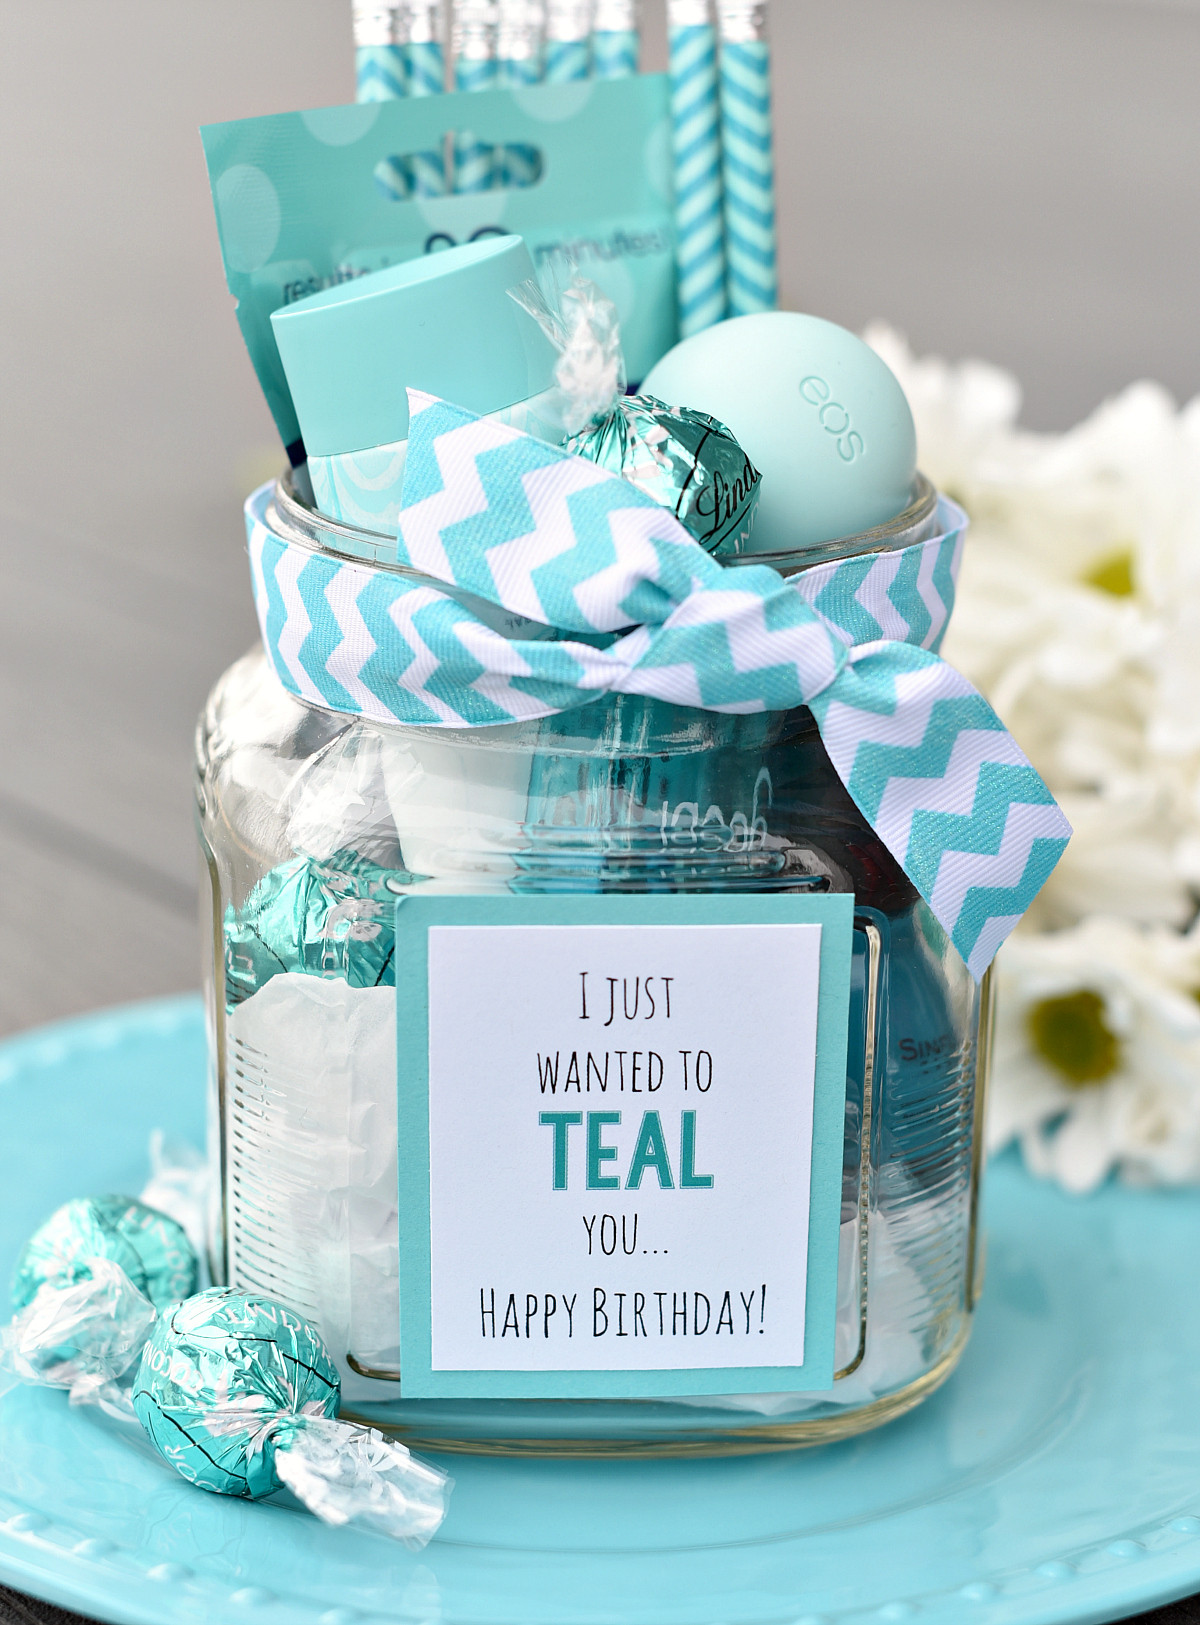 Gift Ideas For Best Friends Birthday
 Teal Birthday Gift Idea for Friends – Fun Squared